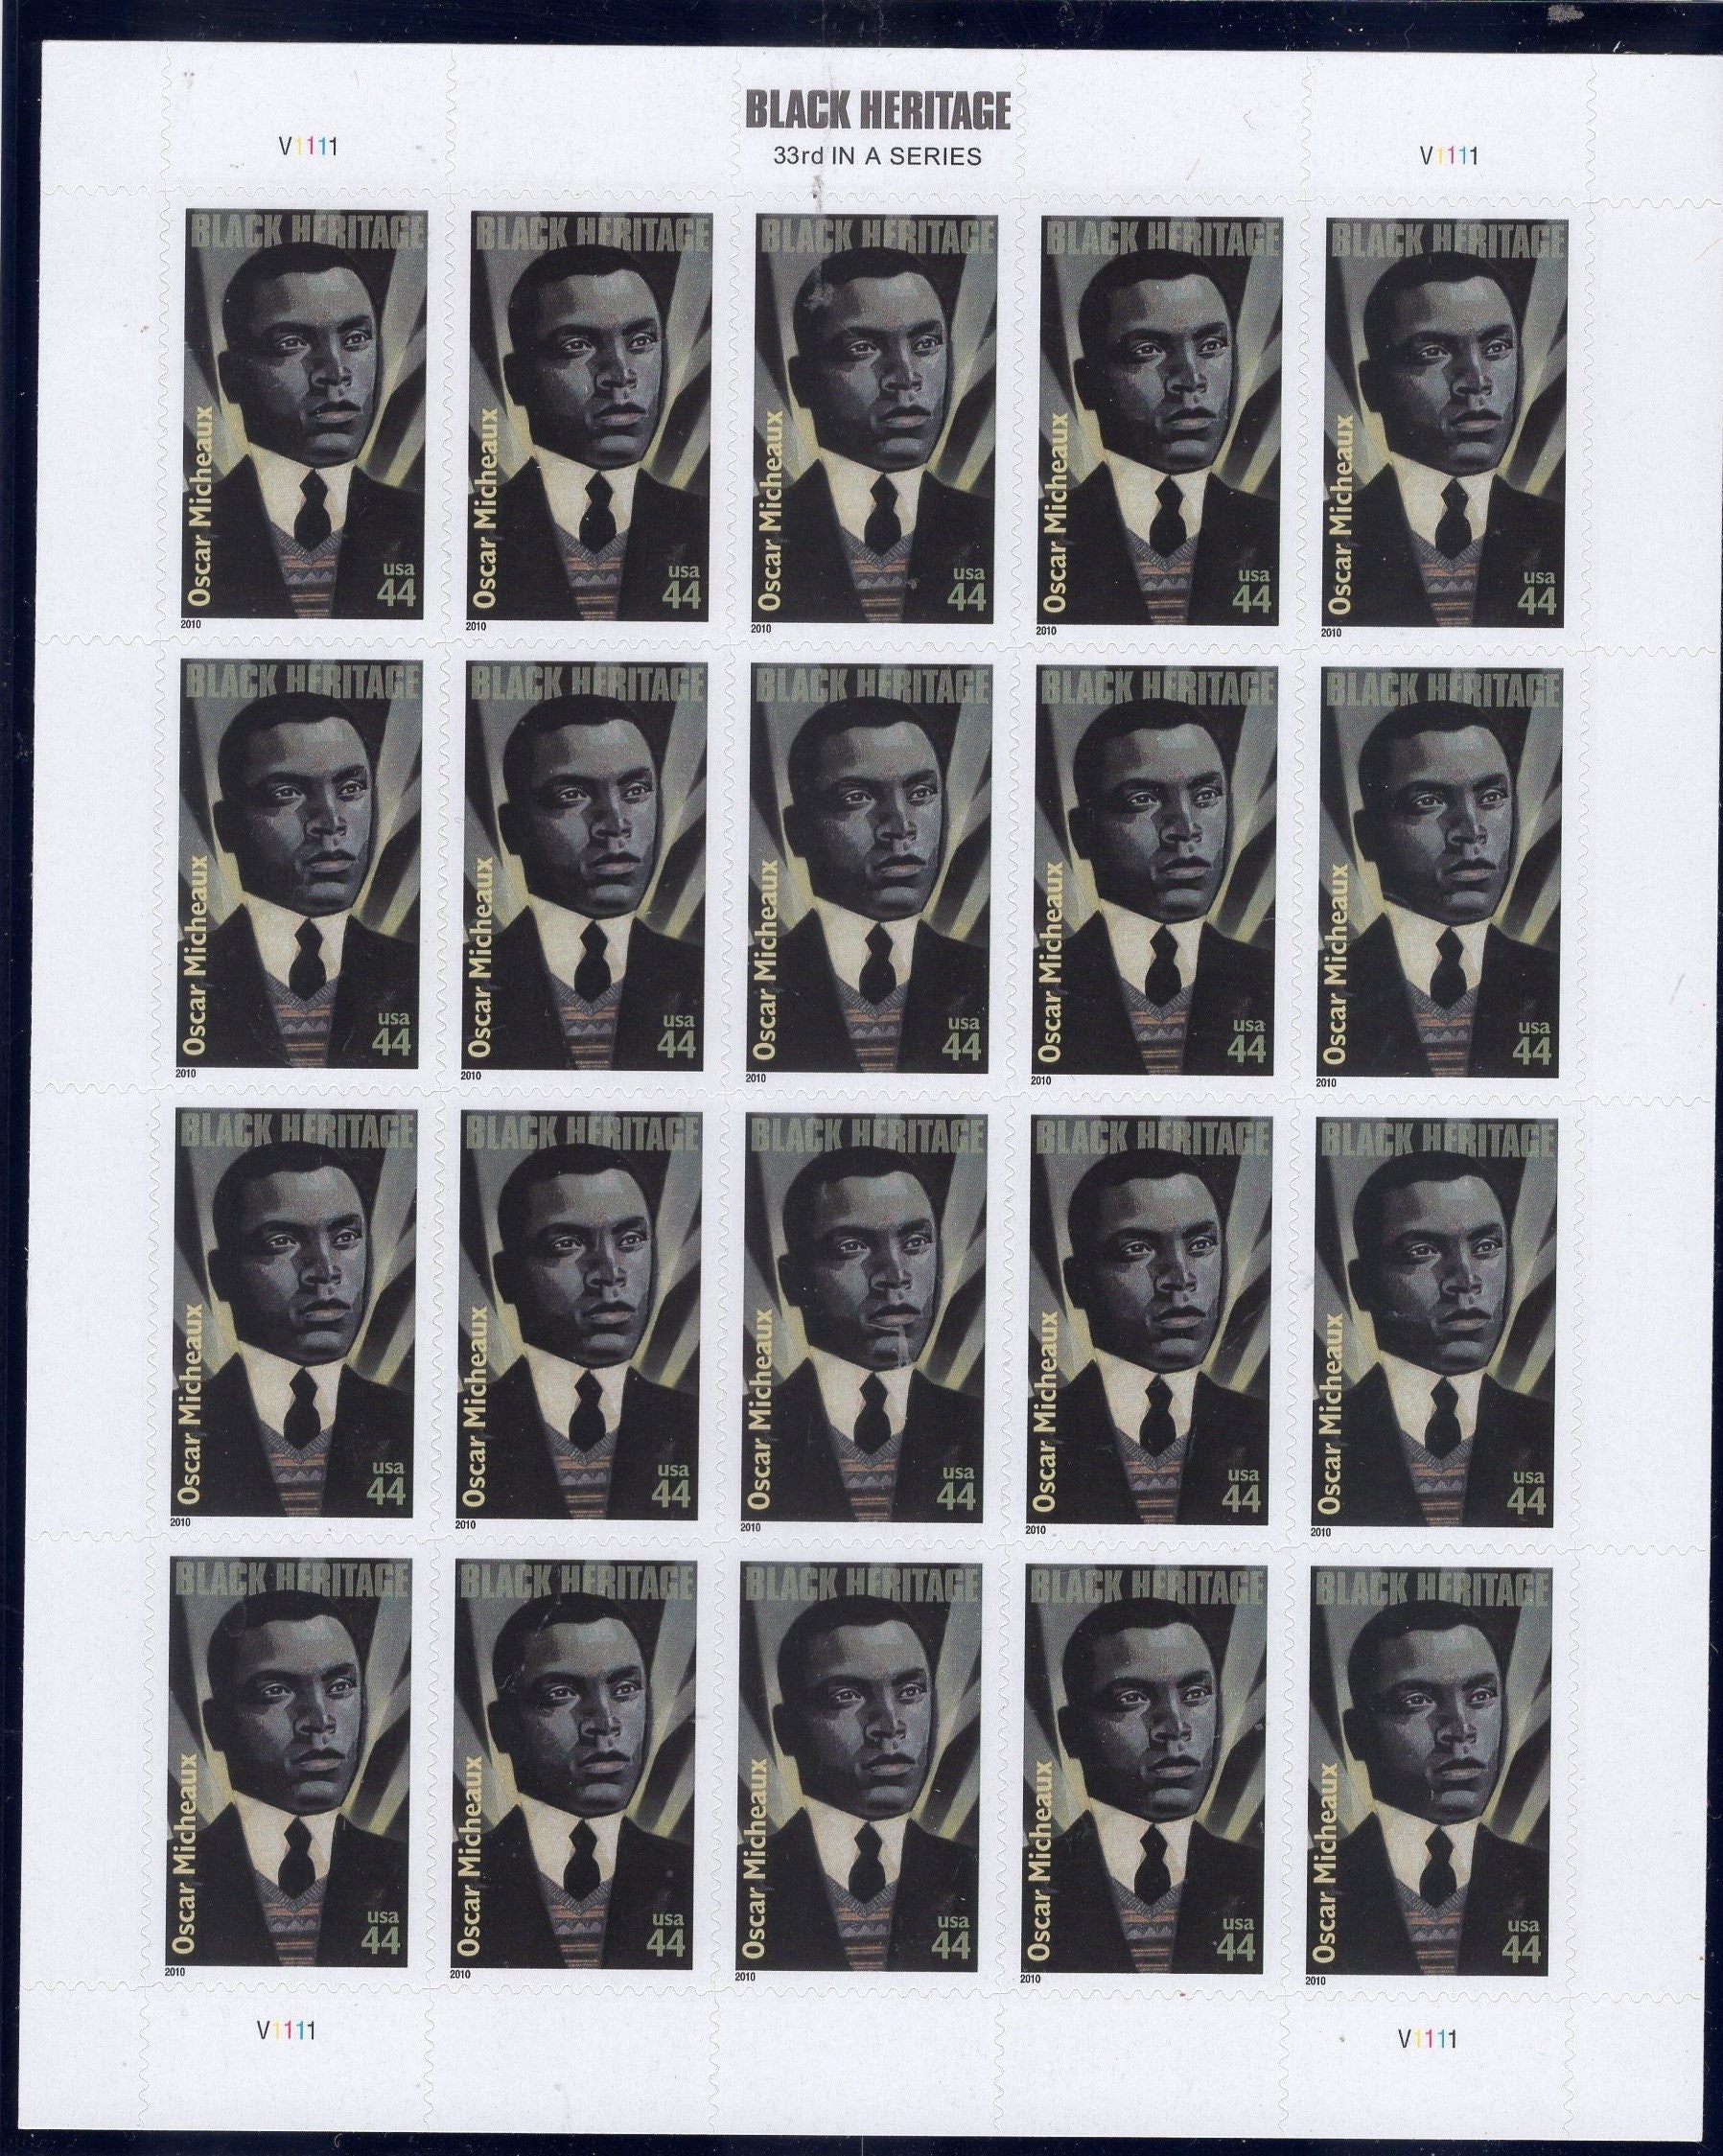 OSCAR MICHEAUX CINEMA Film Director Black American Heritage Sheet of 20 - Issued in 2010 - s4464 - Quick